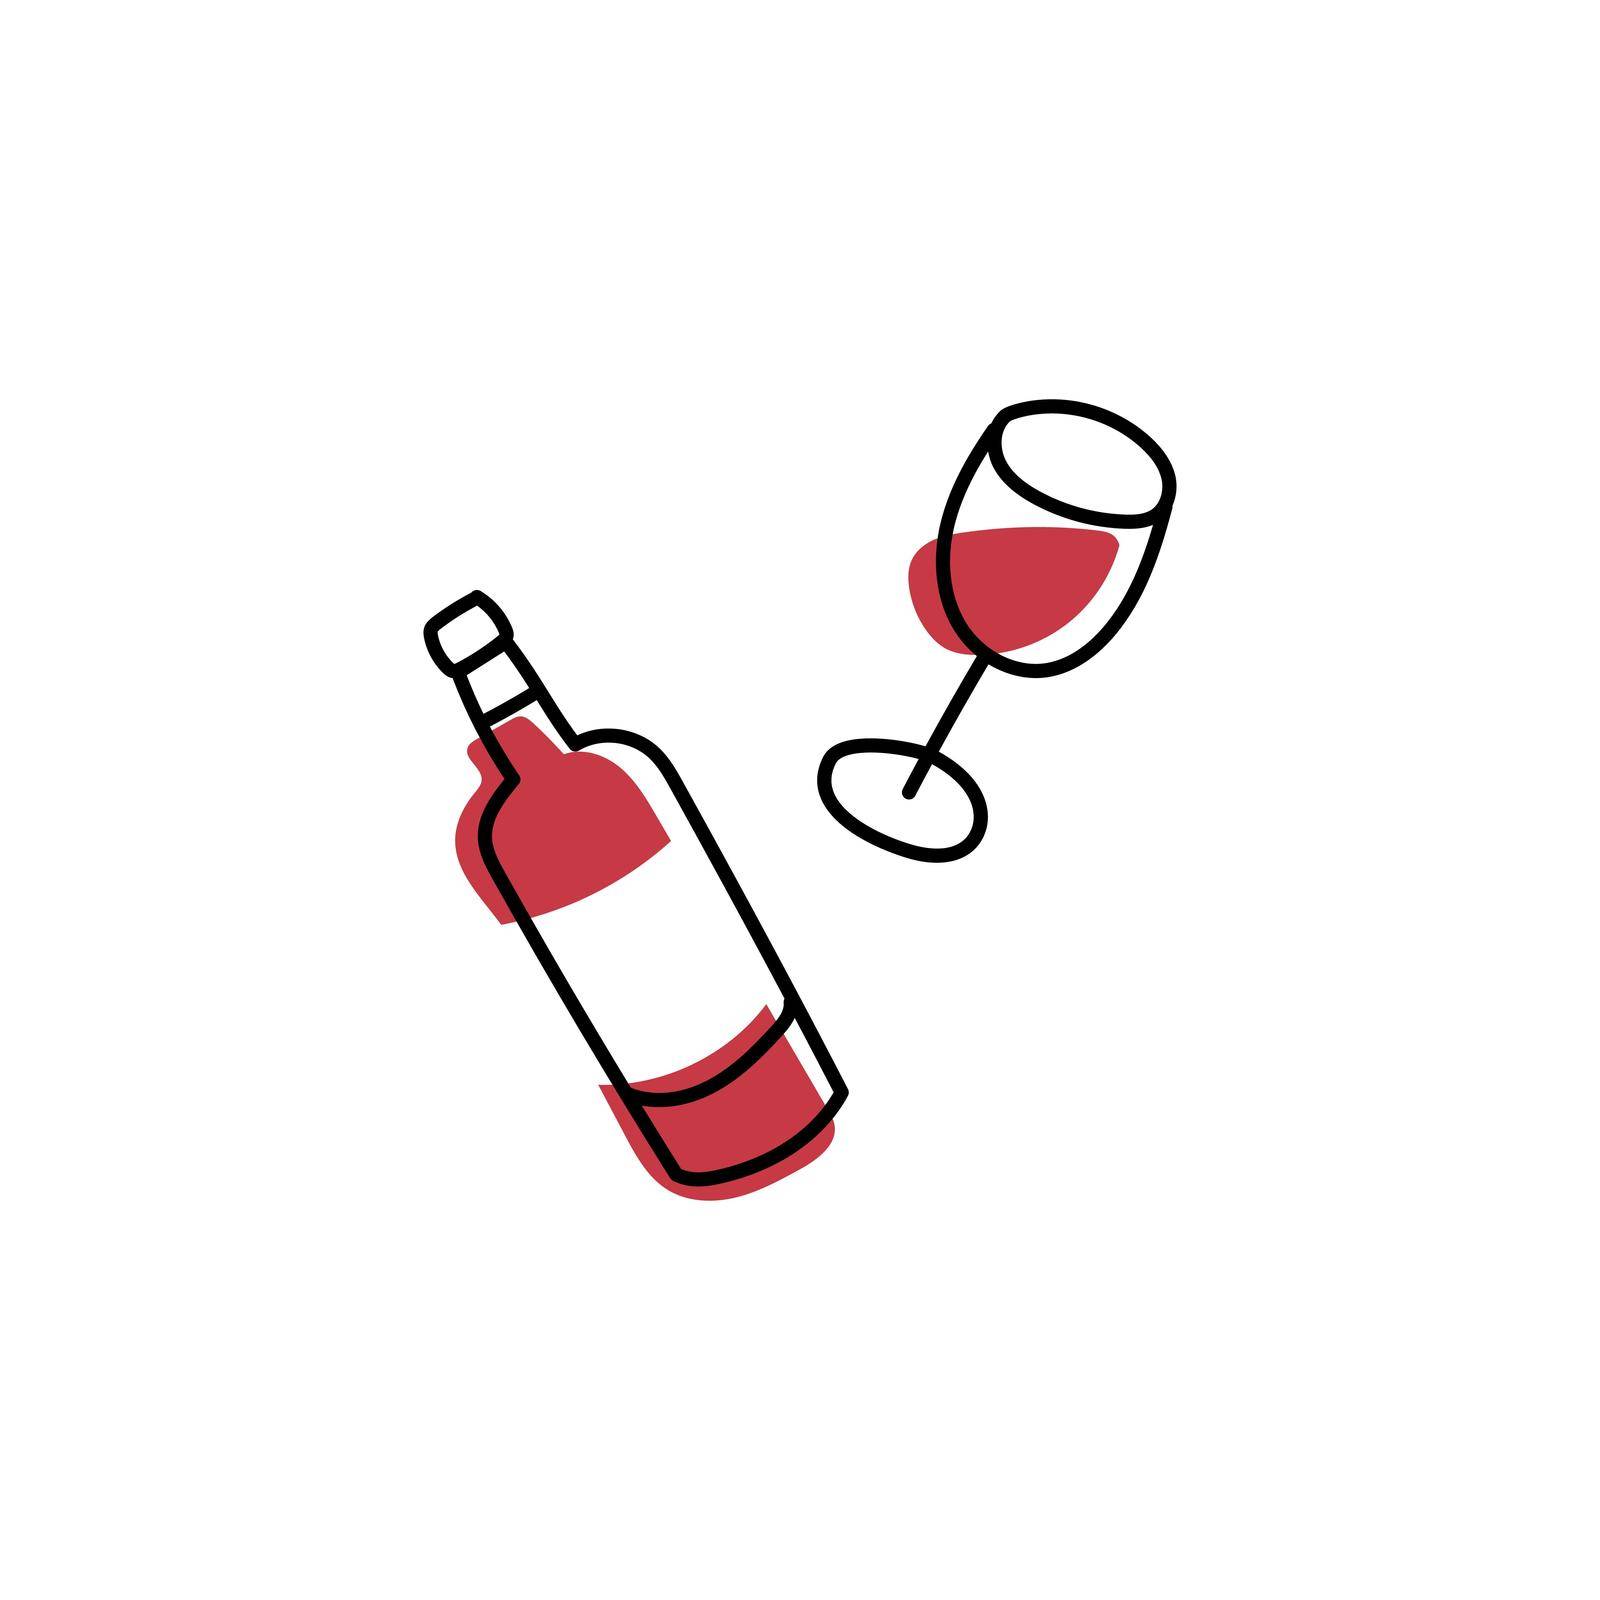 Simple minimalist red wine icon, offset color with black hand drawn doodle outline. Isolated on white background.